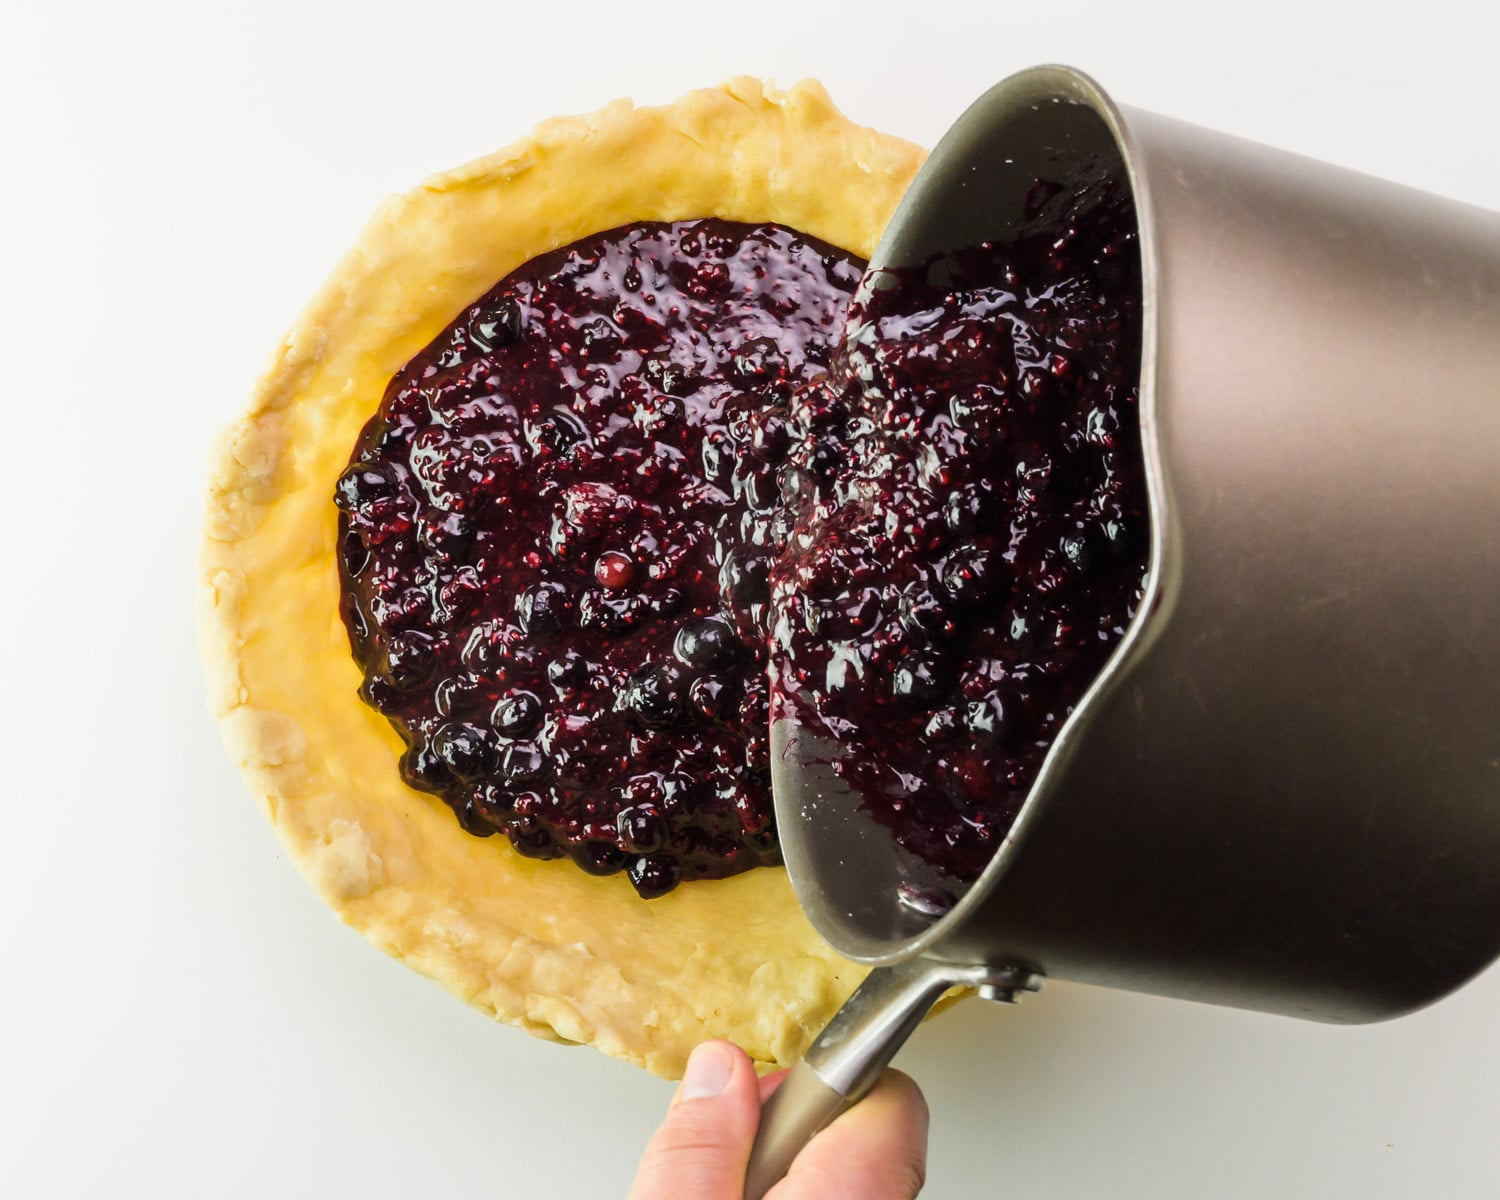 Berry filling is being poured from a saucepan into a prepared pie crust.